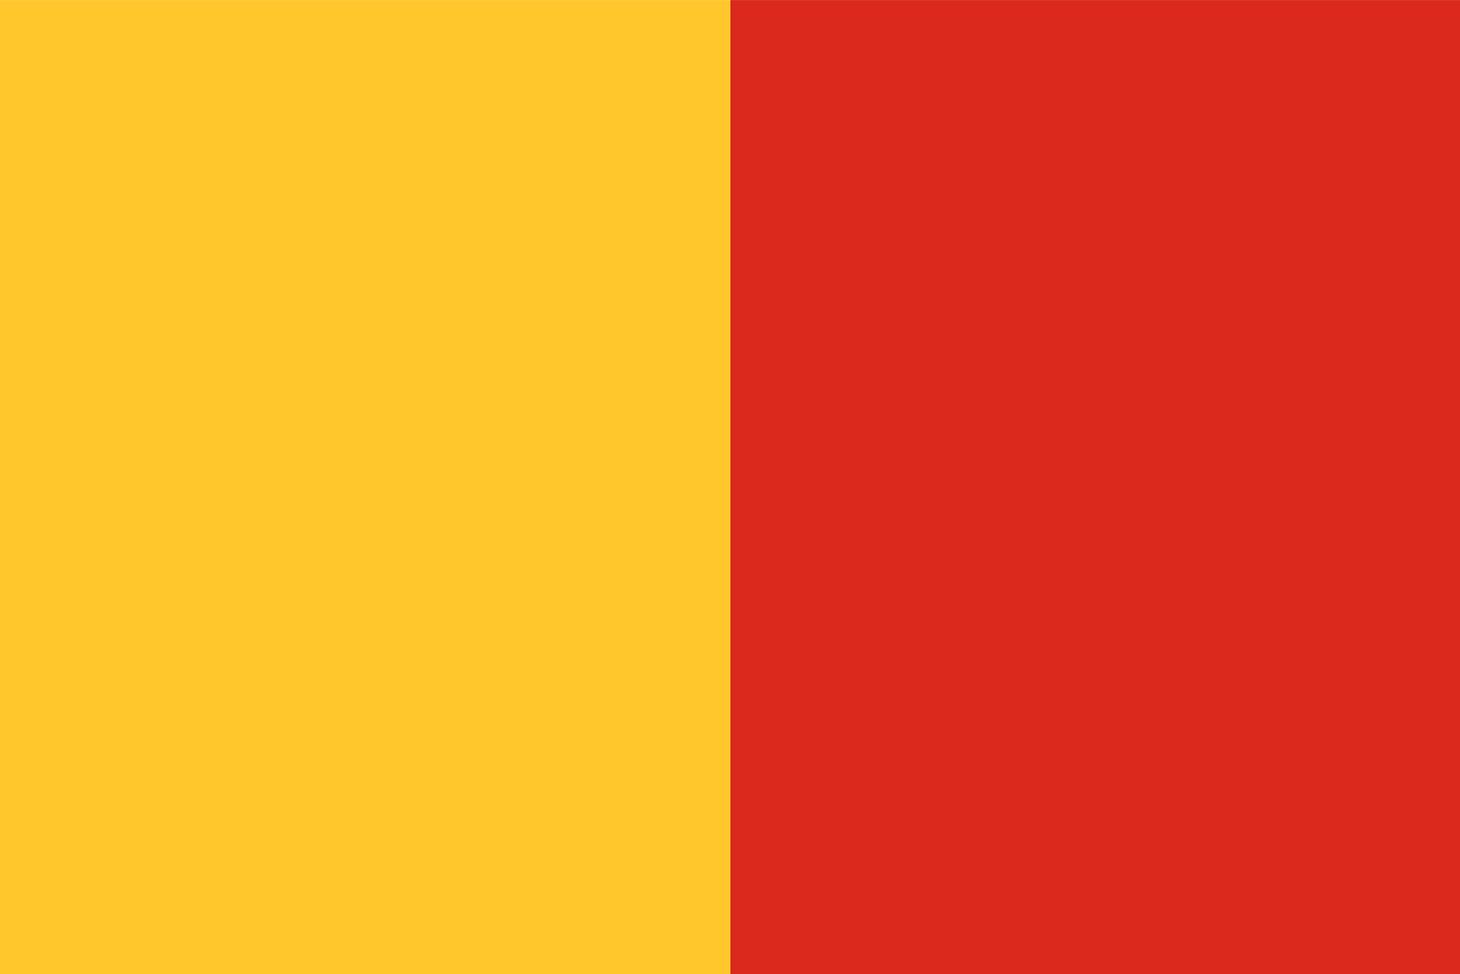 Block of red and yellow